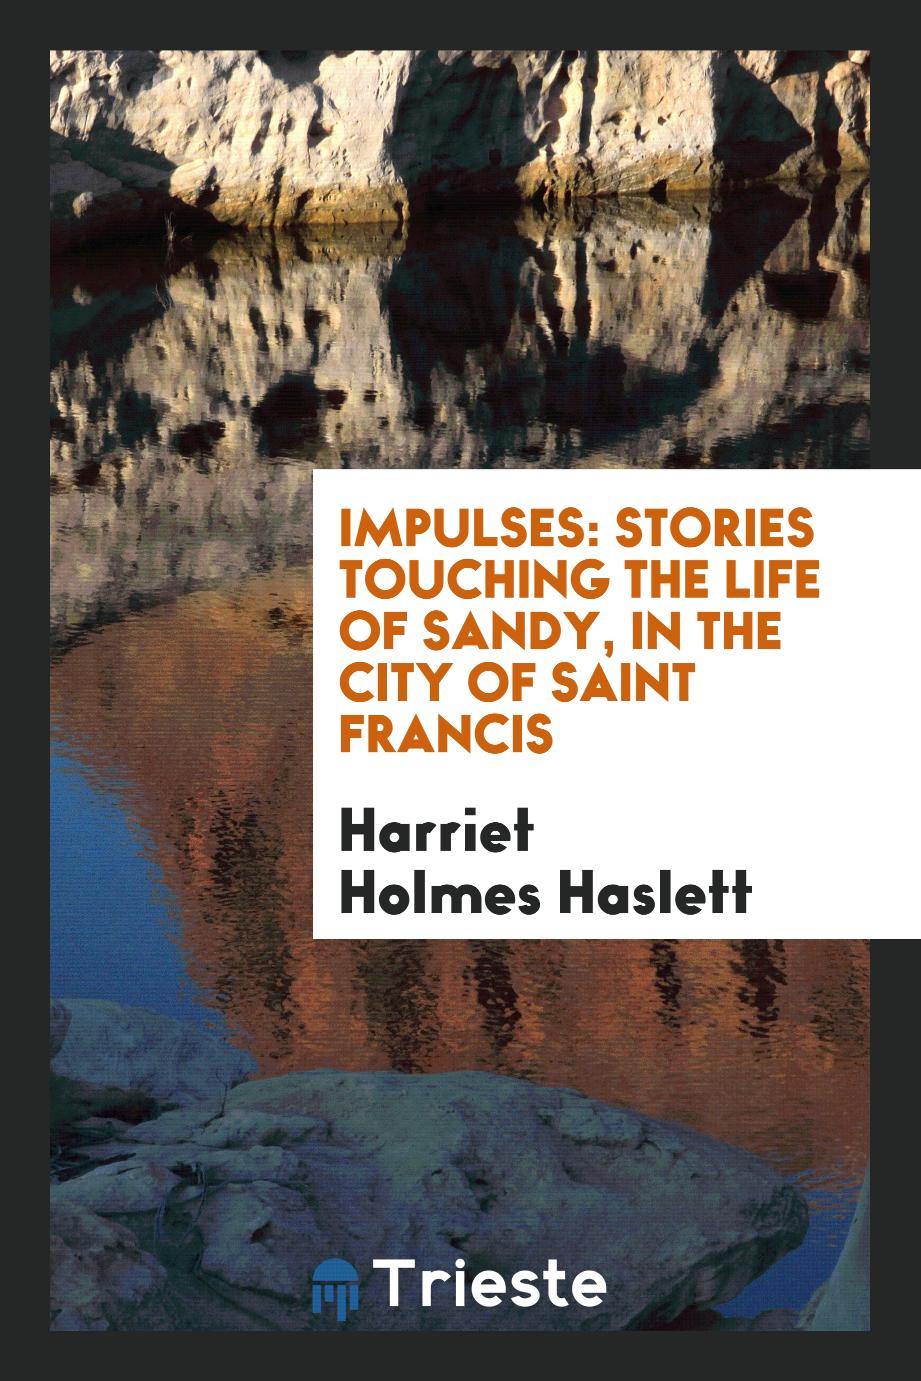 Impulses: Stories Touching the Life of Sandy, in the City of Saint Francis